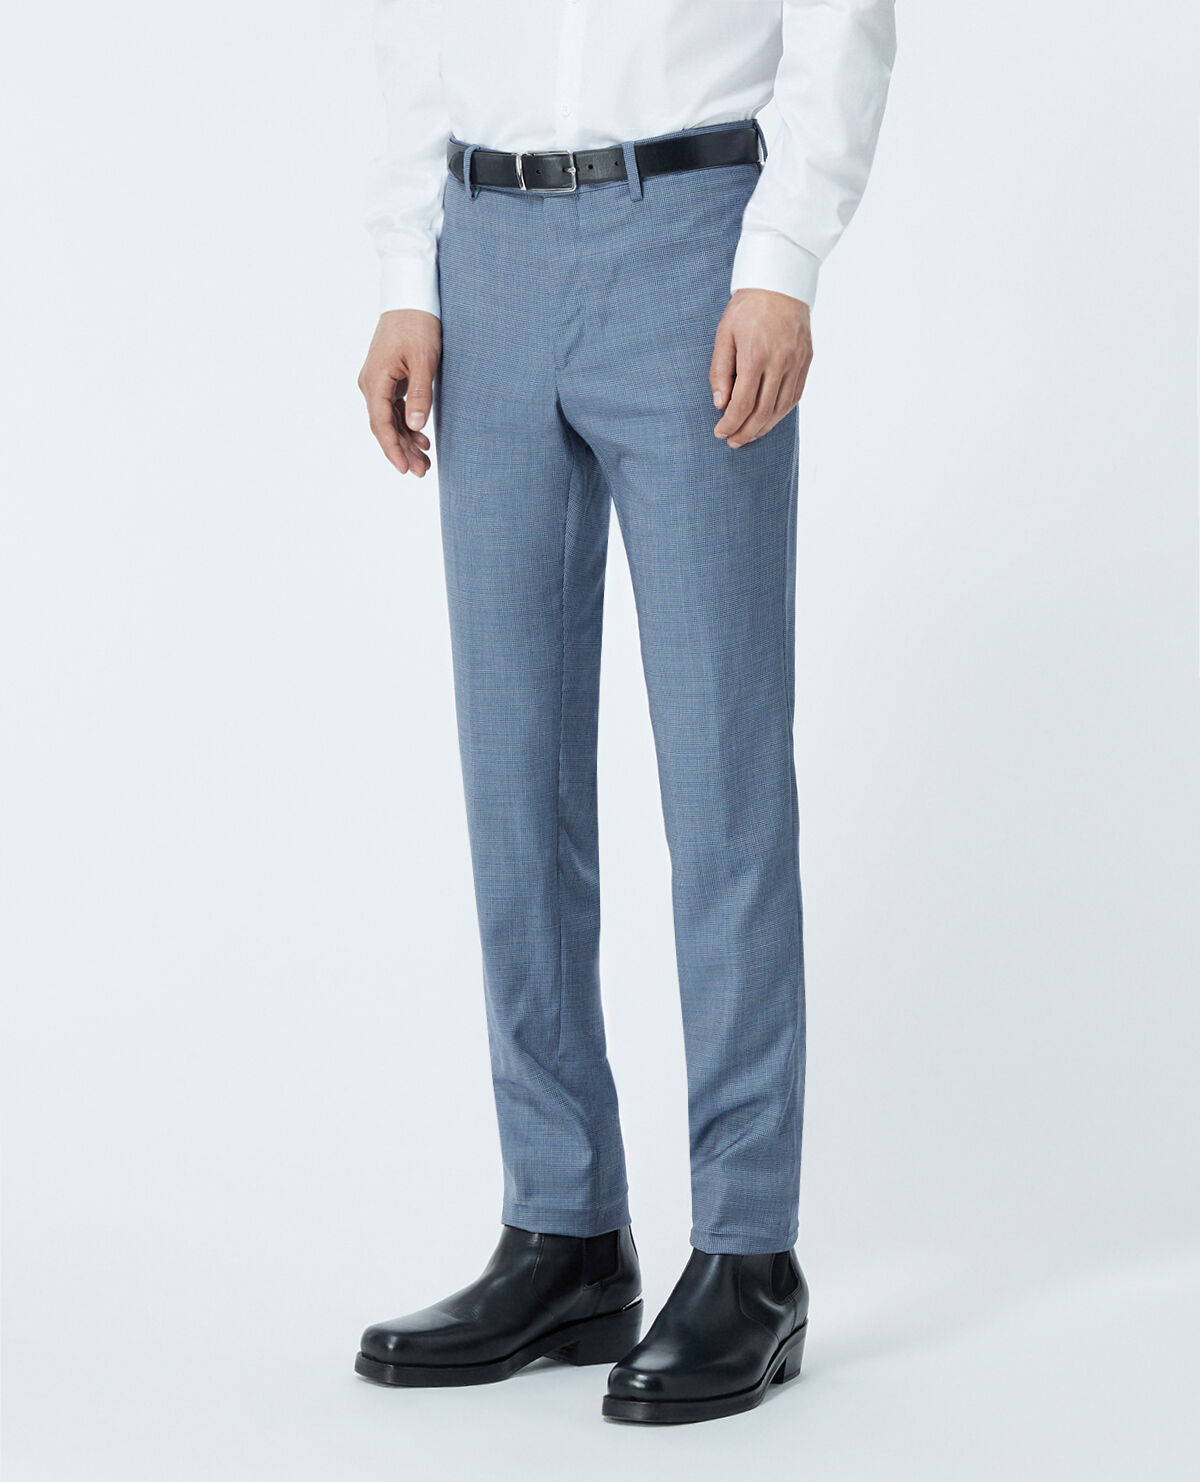 Style Hook Polyster Blend Formal Trousers For Man regular fit |formal pants  blue colour |